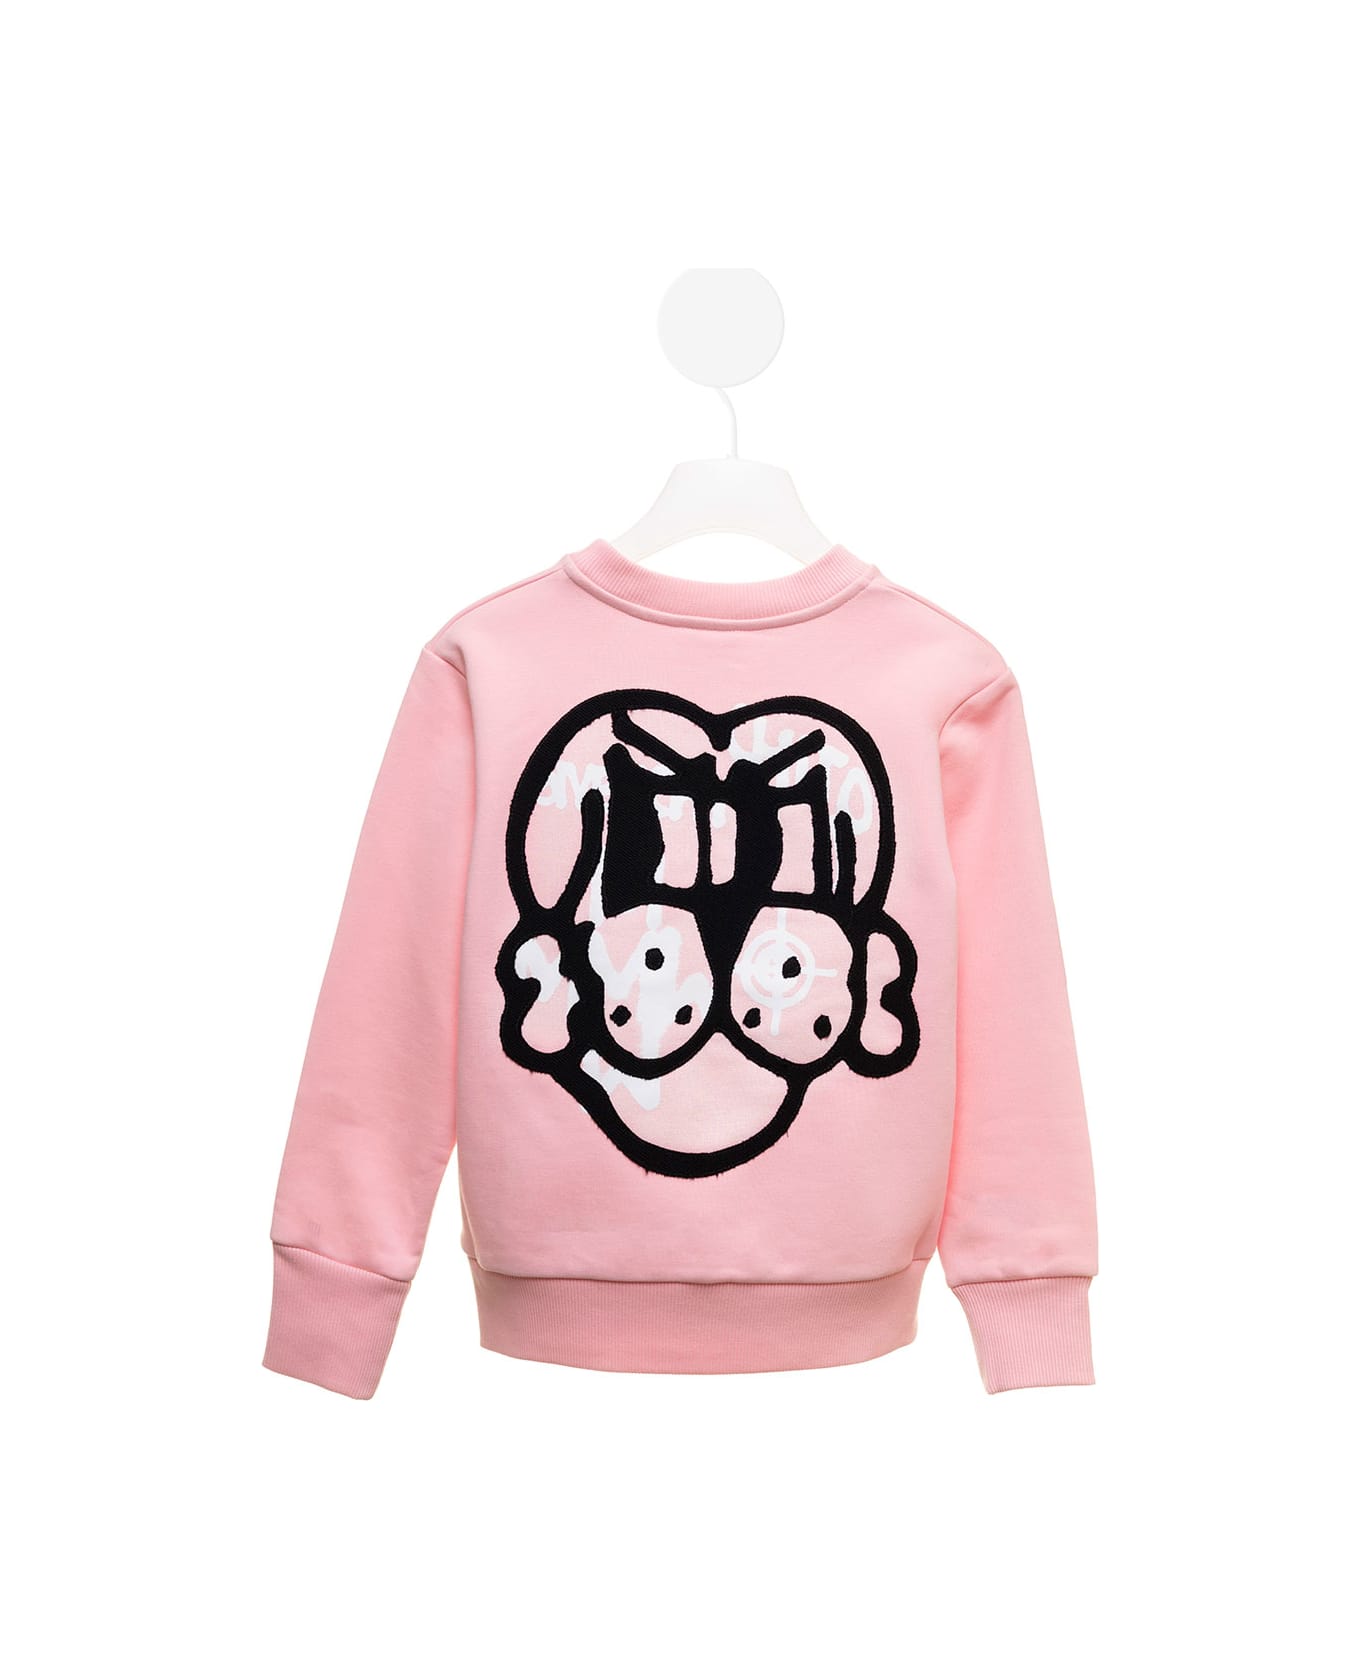 Givenchy Kids Girl's Pink Sweatshirt With Back Embroidery - Pink